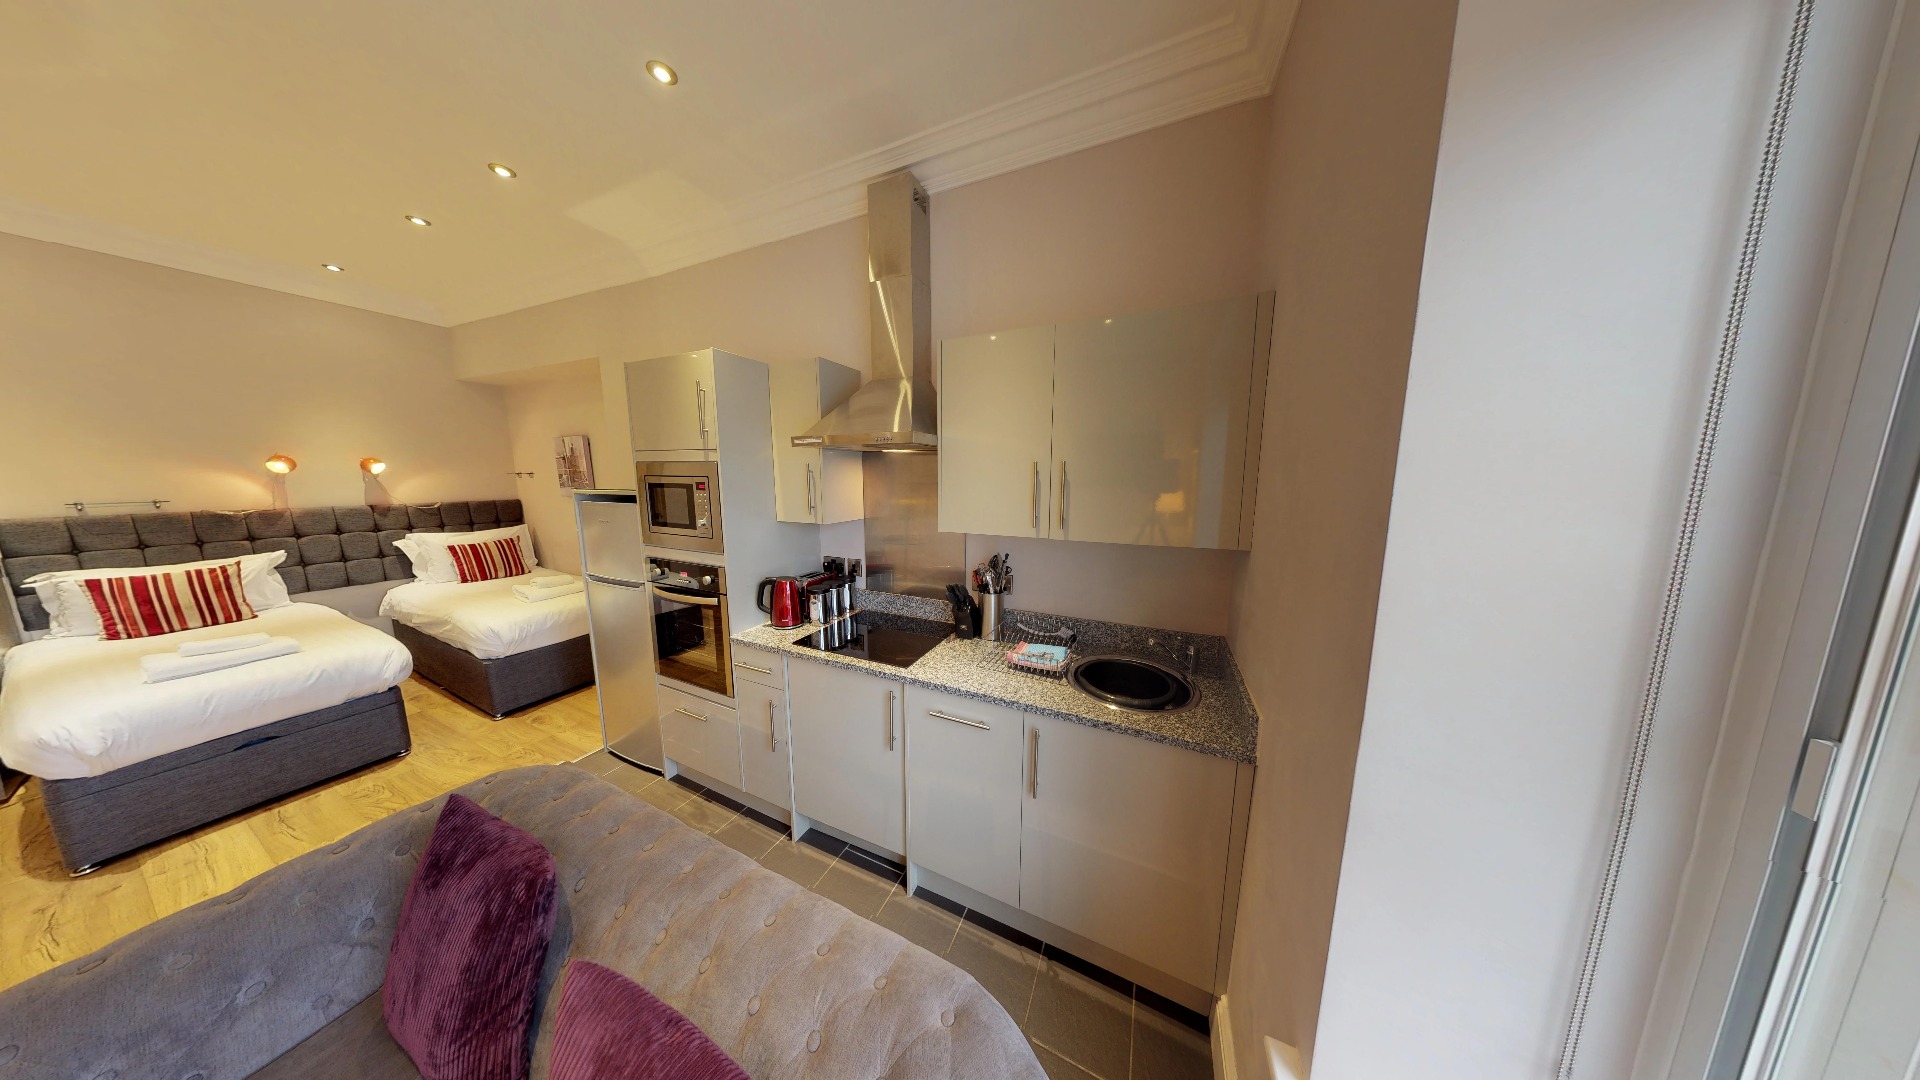 Harrogate Lifestyle Apartments Studio apartment to rent in Harrogate town centre Kings Road